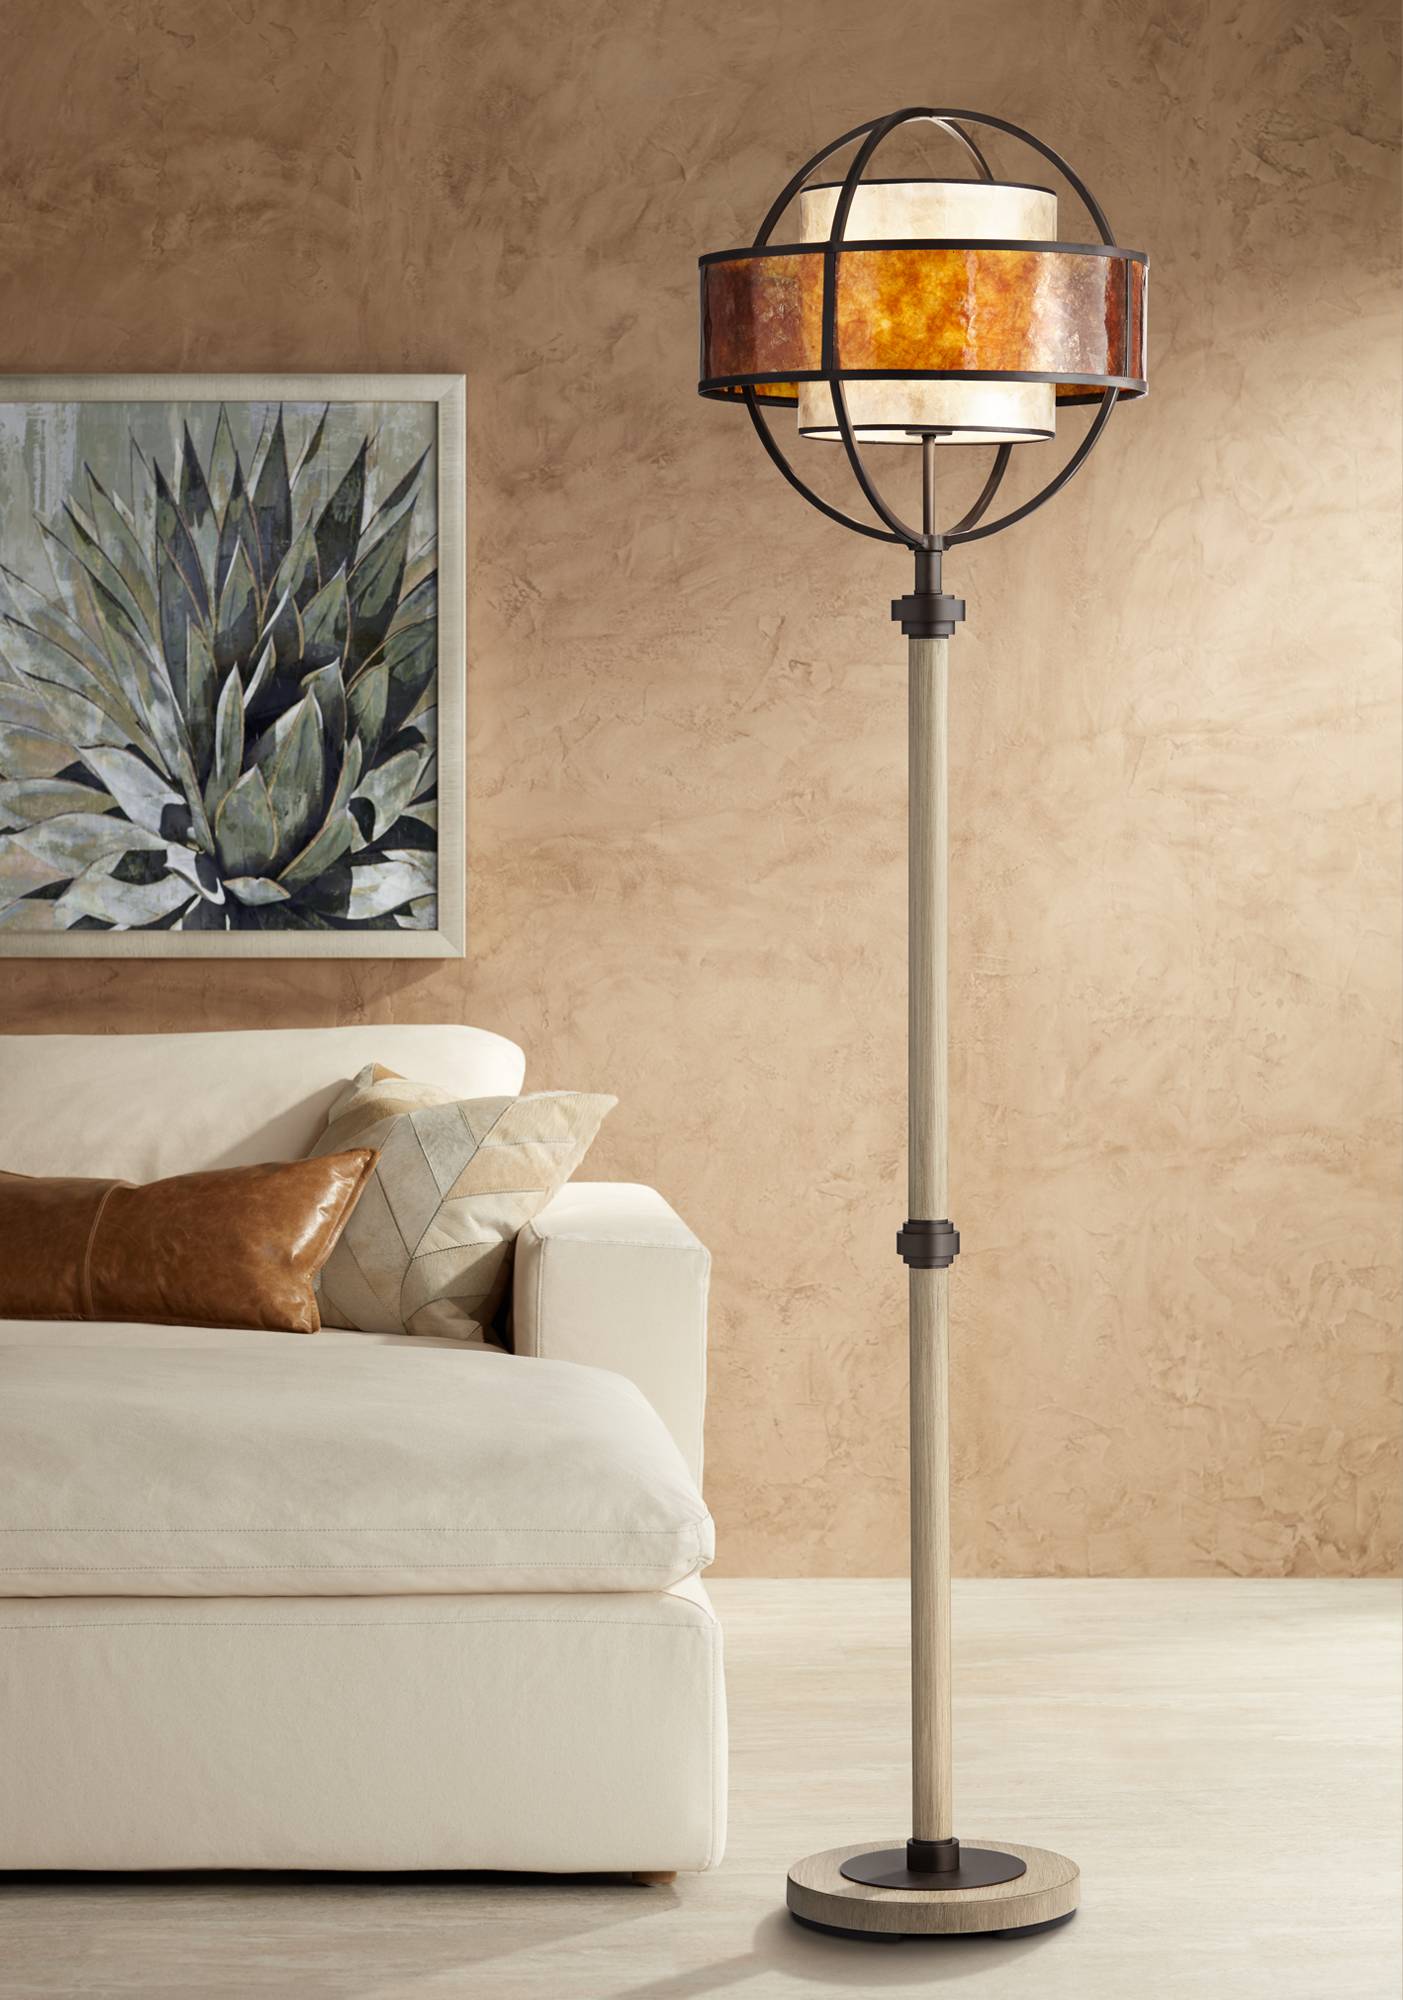 Rustic Mission Floor Lamp Light Wood Bronze Mica Shades for Living Room